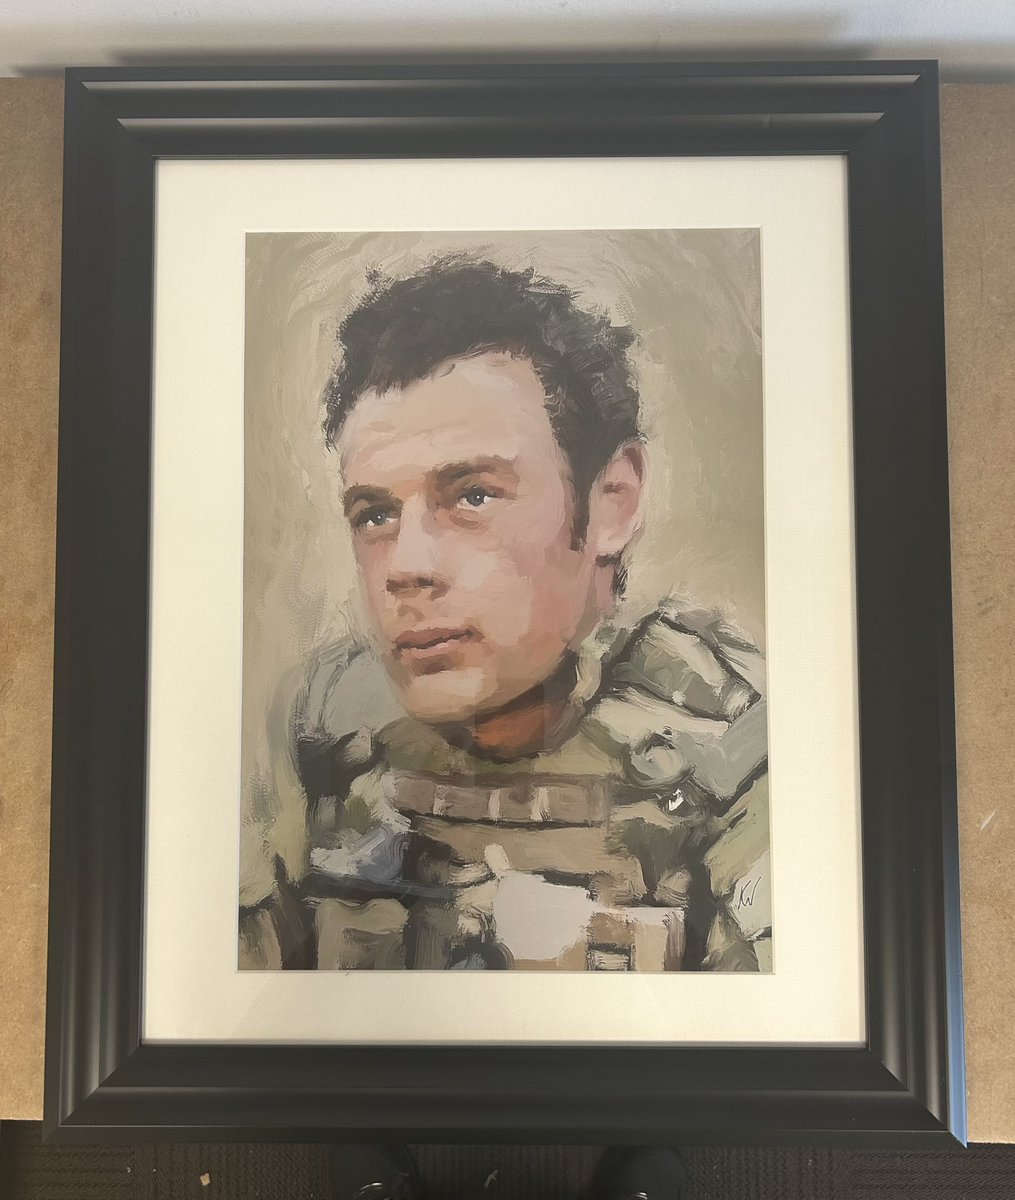 Can anyone help with getting this portrait to his next of kin? Private Martin Simon George Bell GM from 2nd Battalion The Parachute Regiment? @PRA_Airborne @2PARA_HQ @Foxy2Para @supportourparas